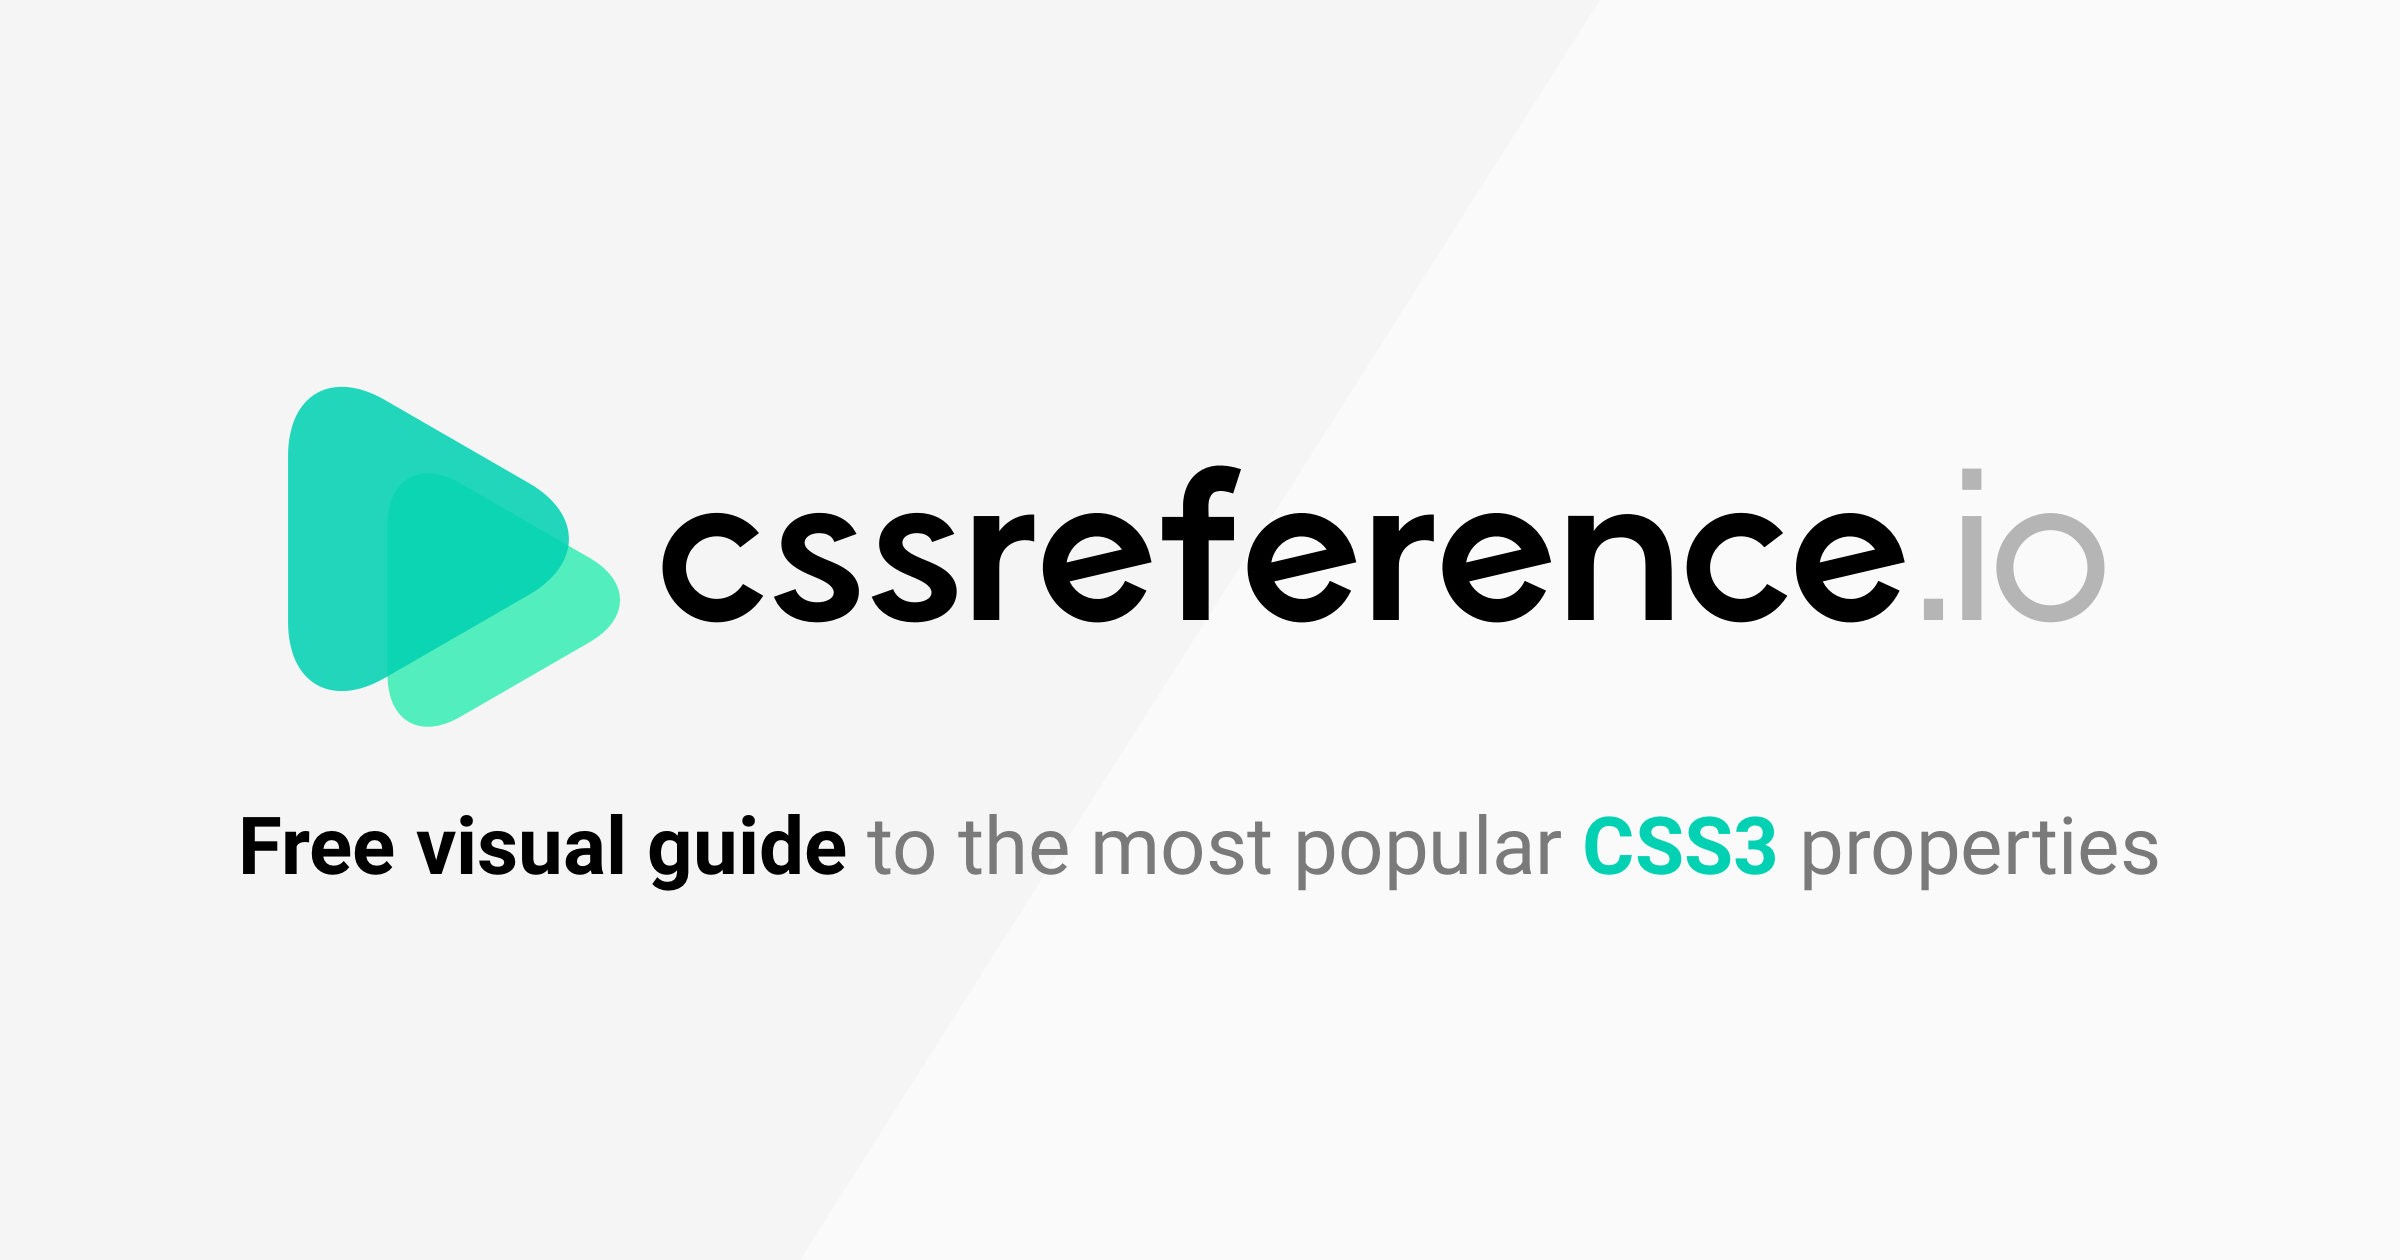 Reference.com Logo - CSS Reference - A free visual guide to CSS